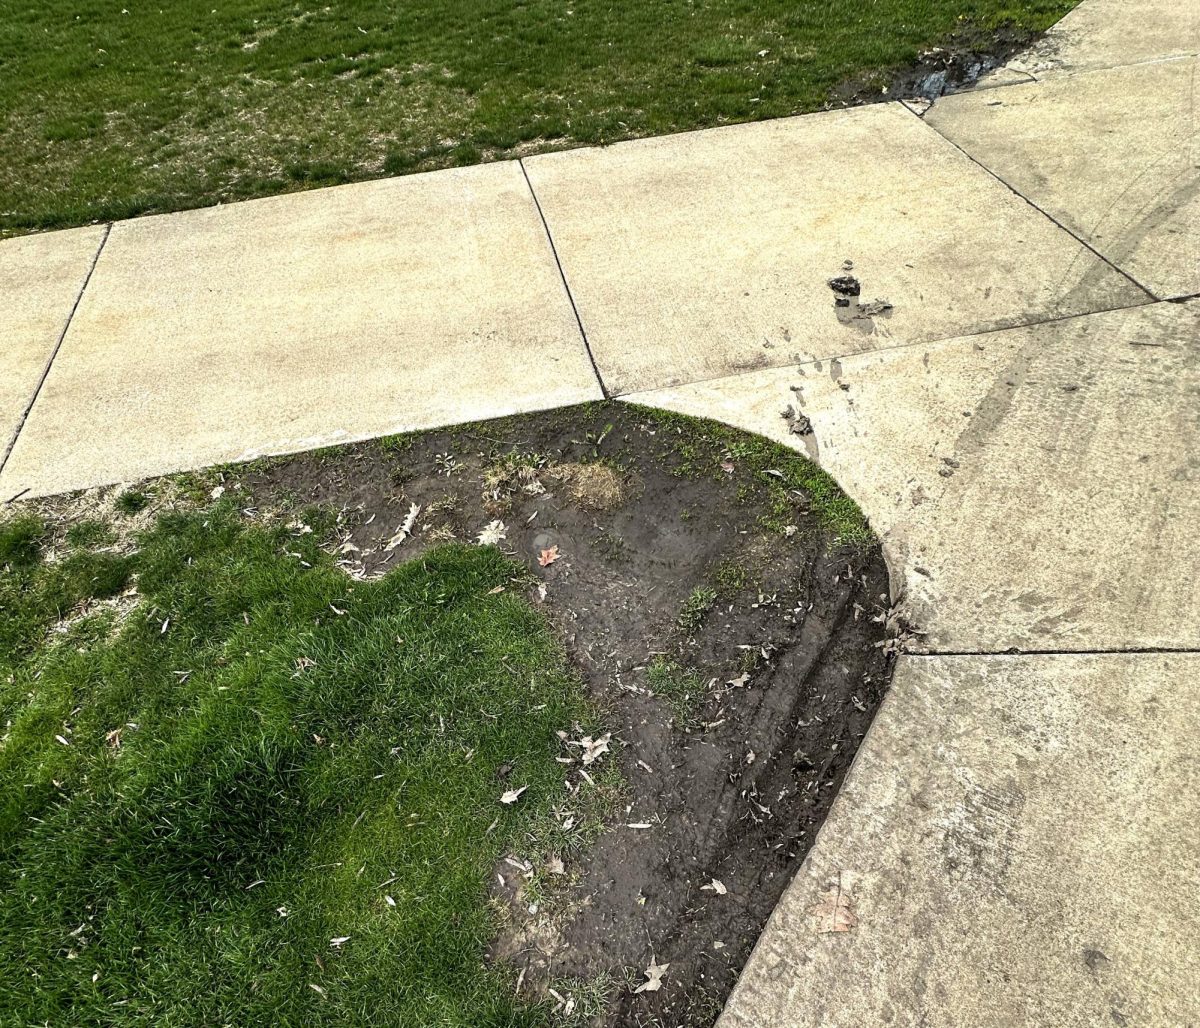 The sidewalk intersection outside Beta House, covered in mud